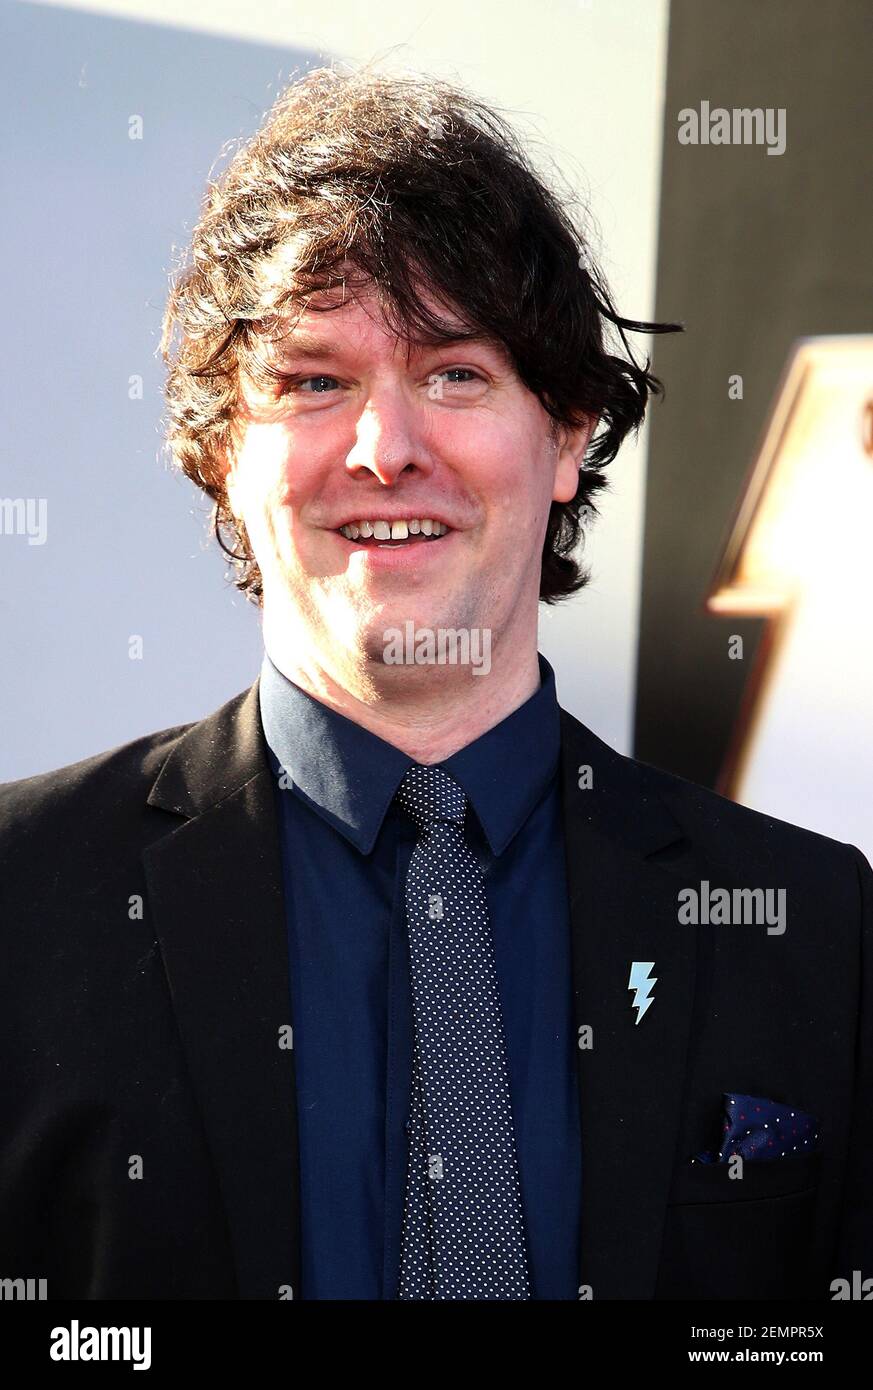 28 March 2019 - Hollywood, California - Darren Lemke. Warner Bros. Pictures and New Line Cinema World Premiere of "SHAZAM!" held at TCL Chinese Theatre. Photo Credit: Faye Sadou/AdMedia/Sipa USA Stock Photo